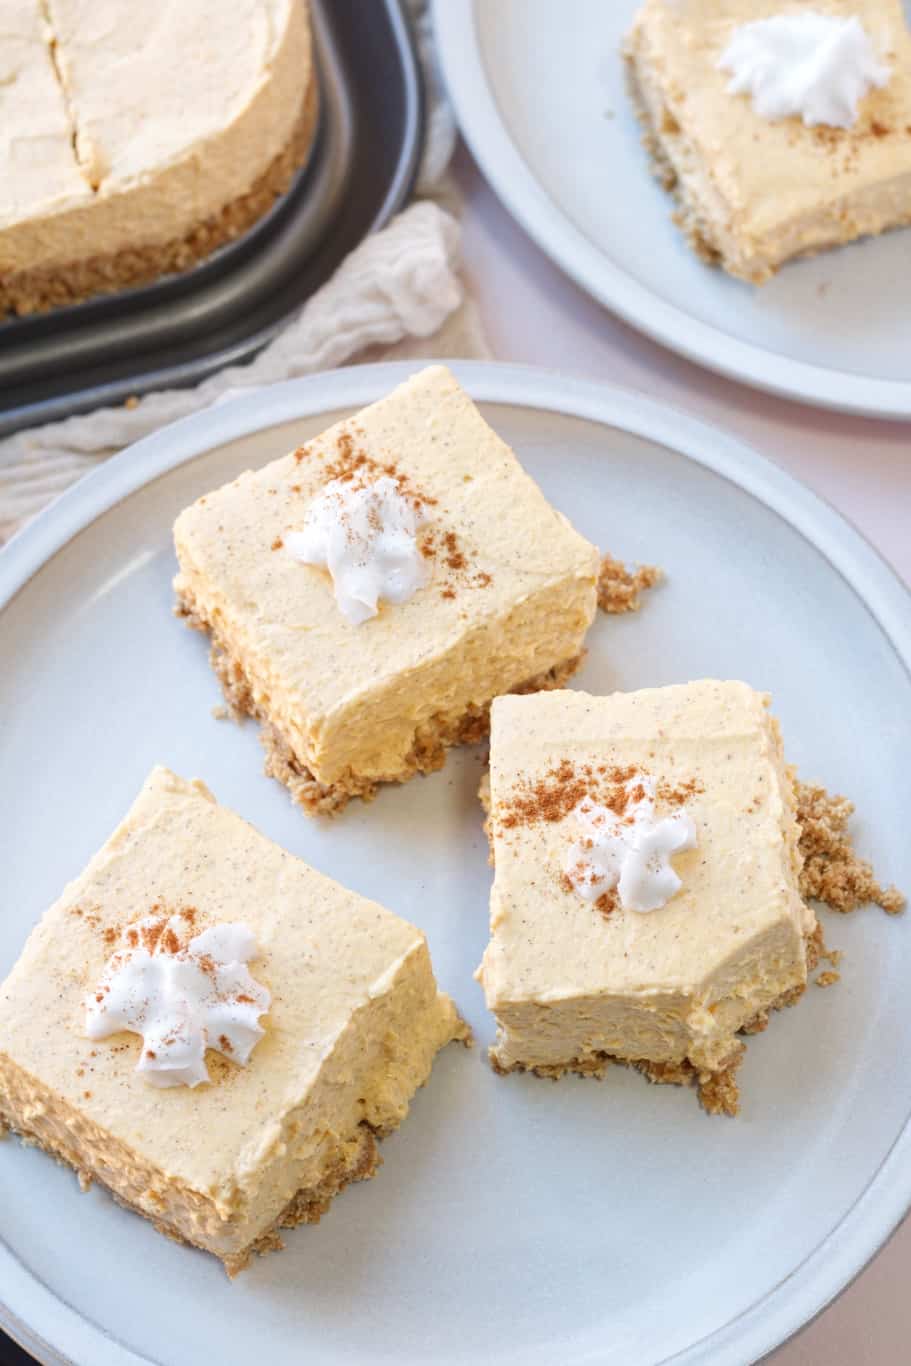 Super creamy no-bake pumpkin bars topped with whipped cream before serving and sprinkle a little bit of cinnamon before serving.